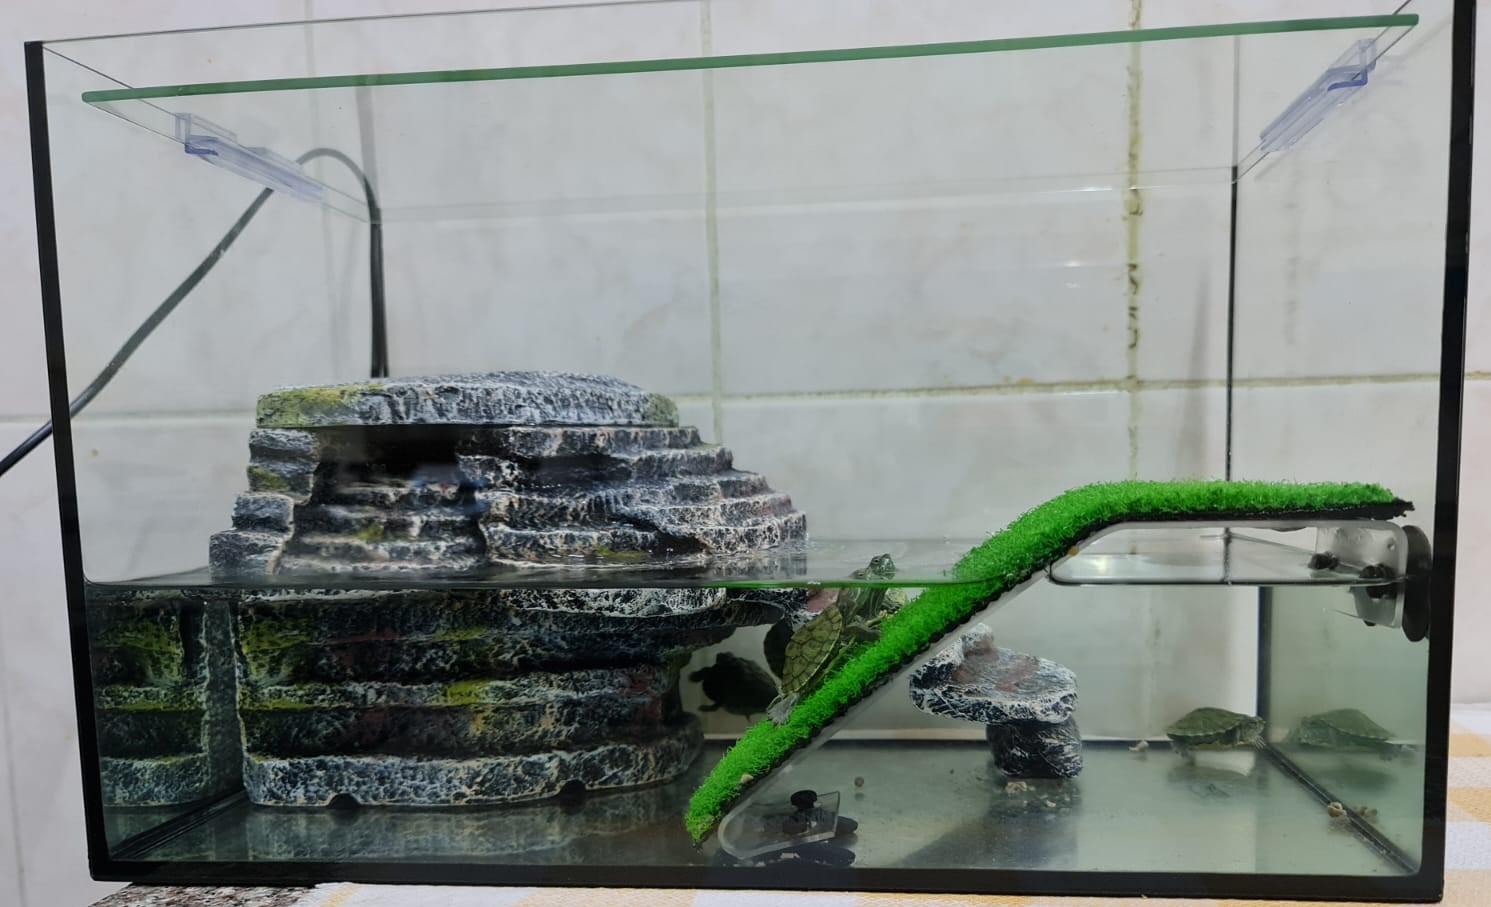 Acquarium with Filter motor and Inside accessories - With 5 turtles.